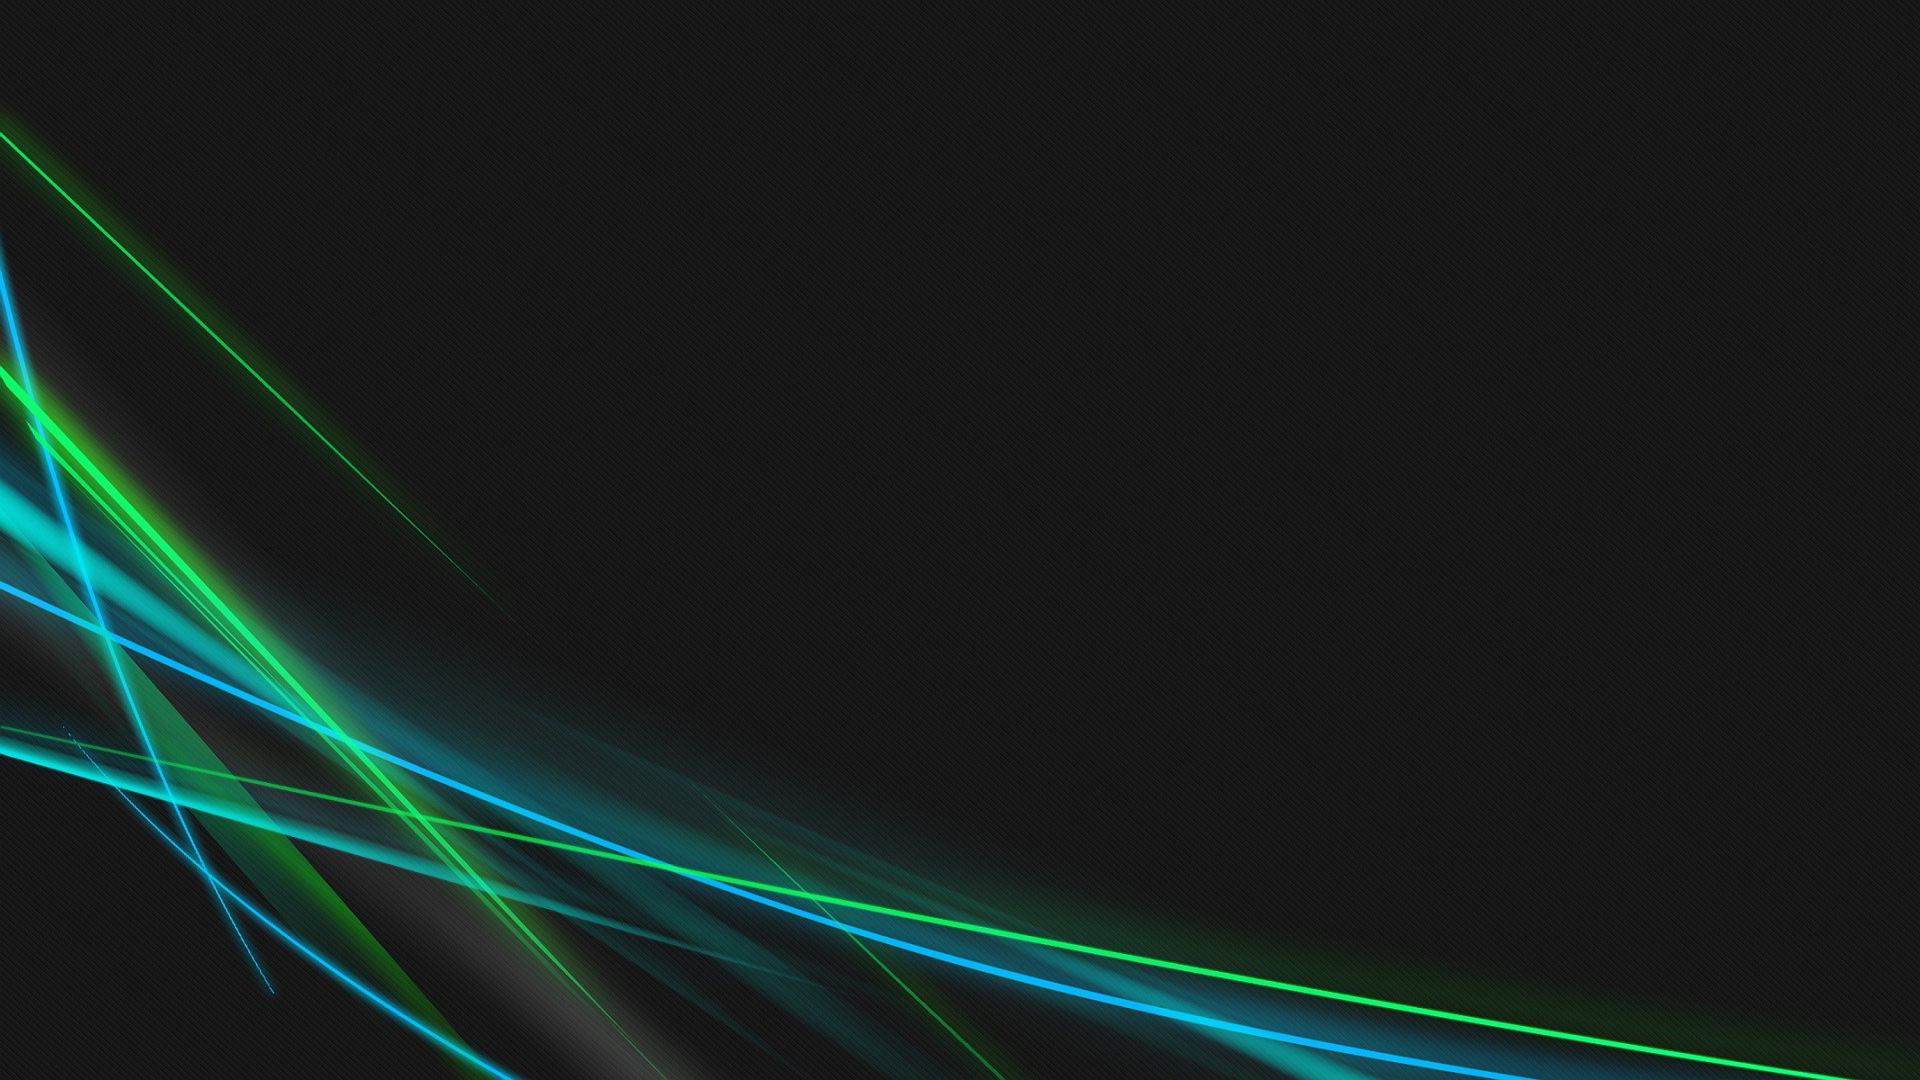 Blue And Green Neon Curves Wallpaper Abstract Blue Green